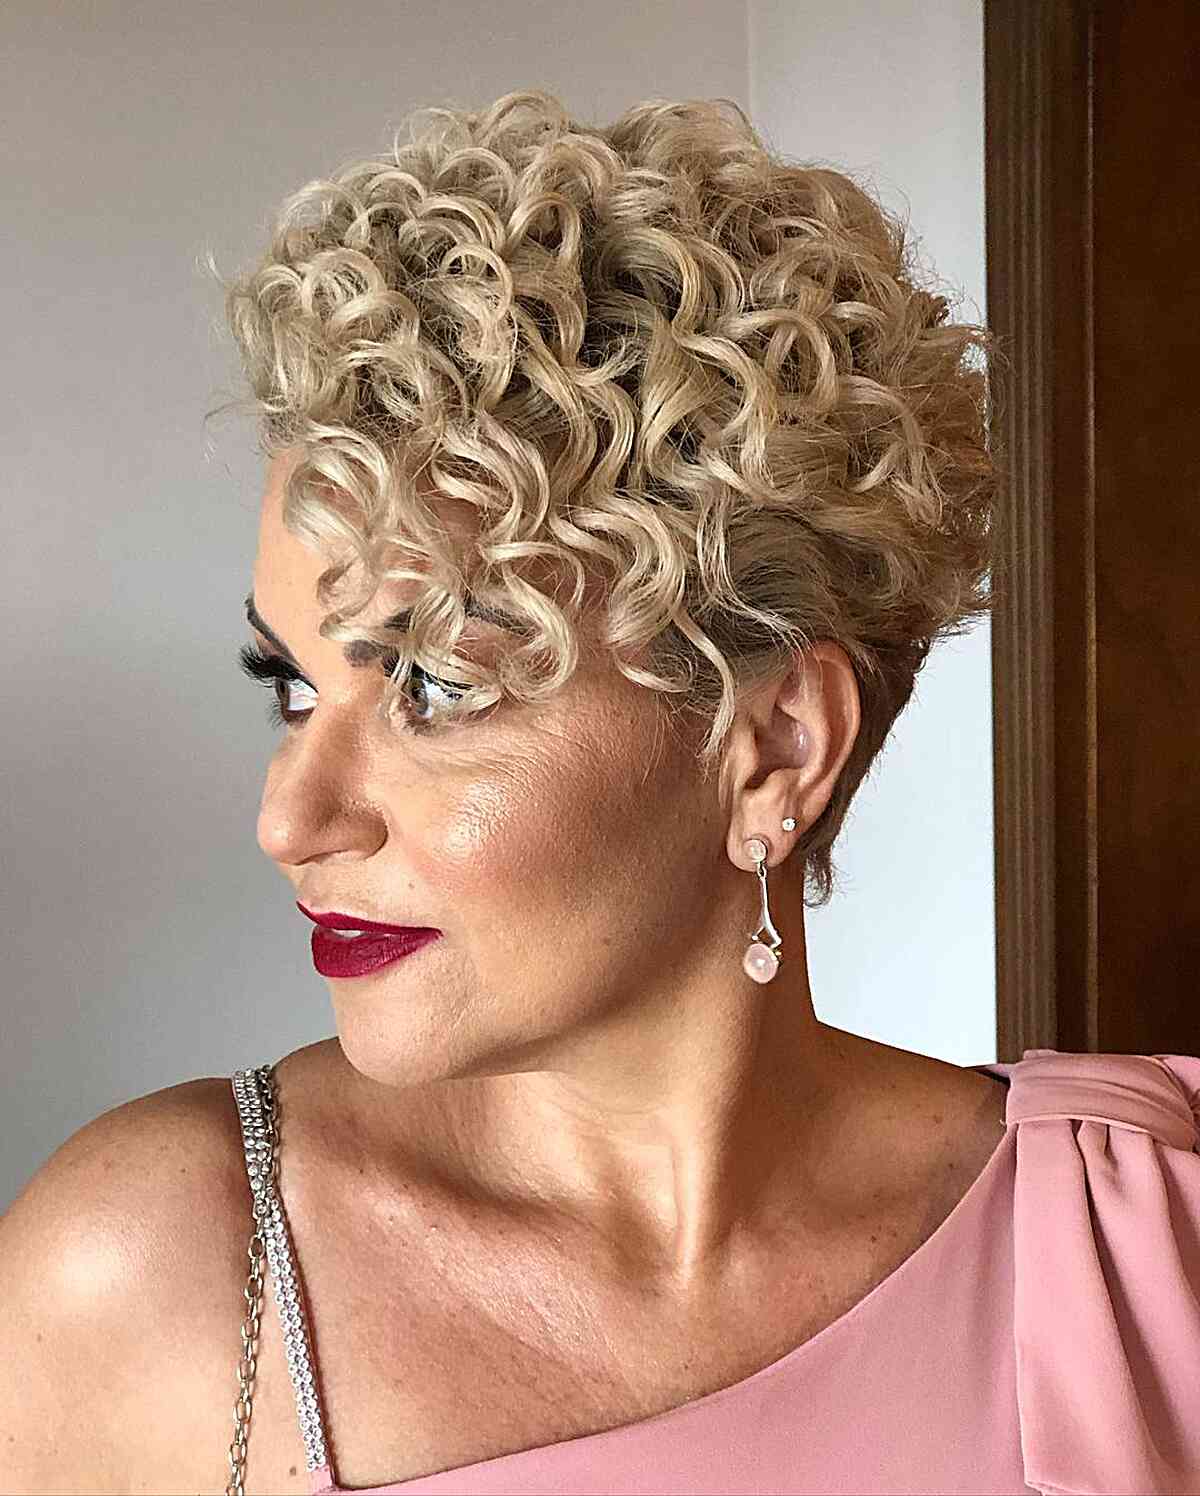 The Perfect Curly Pixie for women with an edgy style and shaved nape